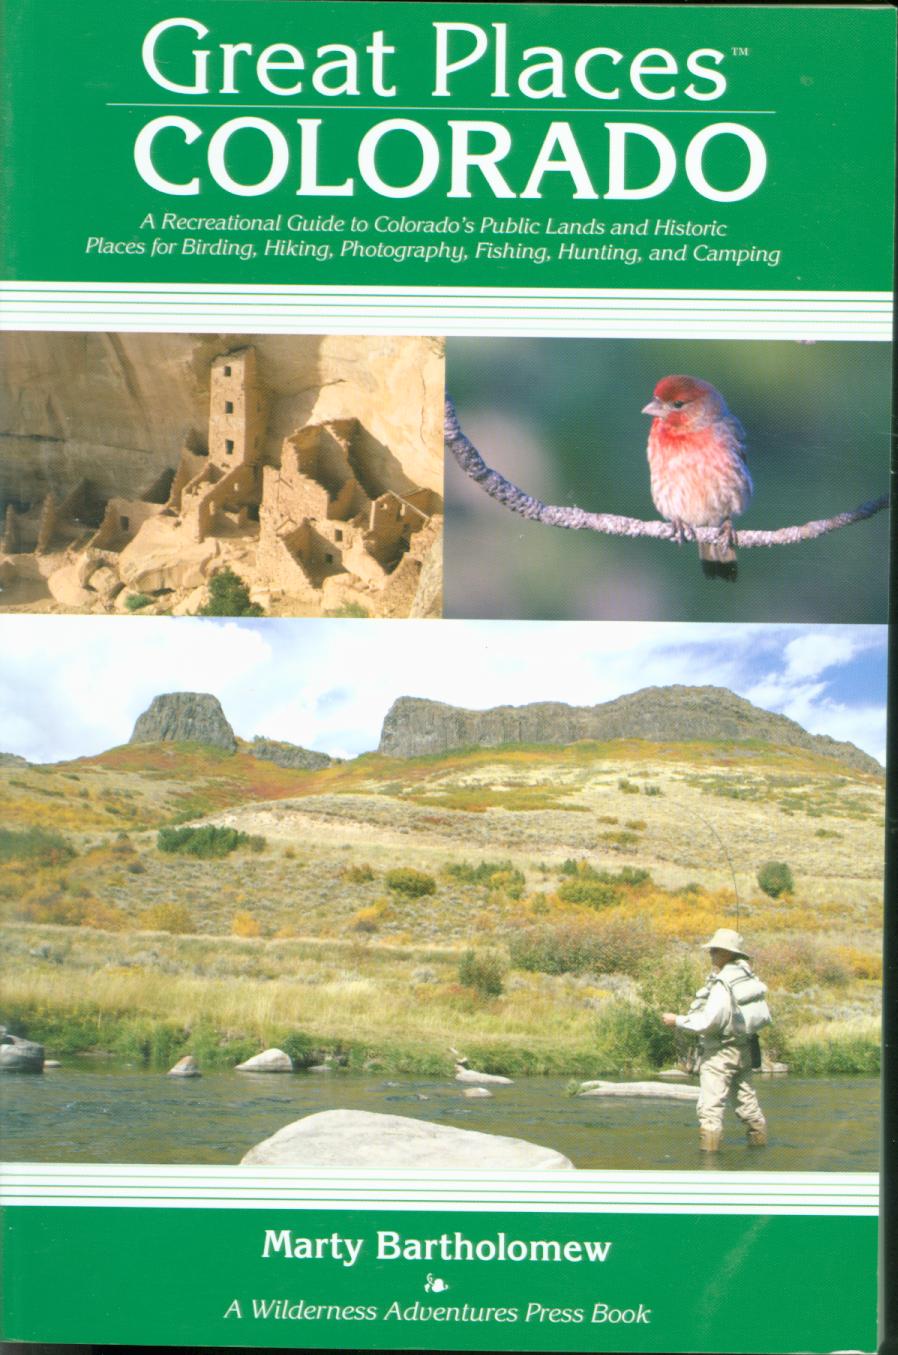 GREAT PLACES COLORADO: a recreational guide to Colorado's public lands and historic places for birding, hiking, photography, fishing, hunting, and camping. 